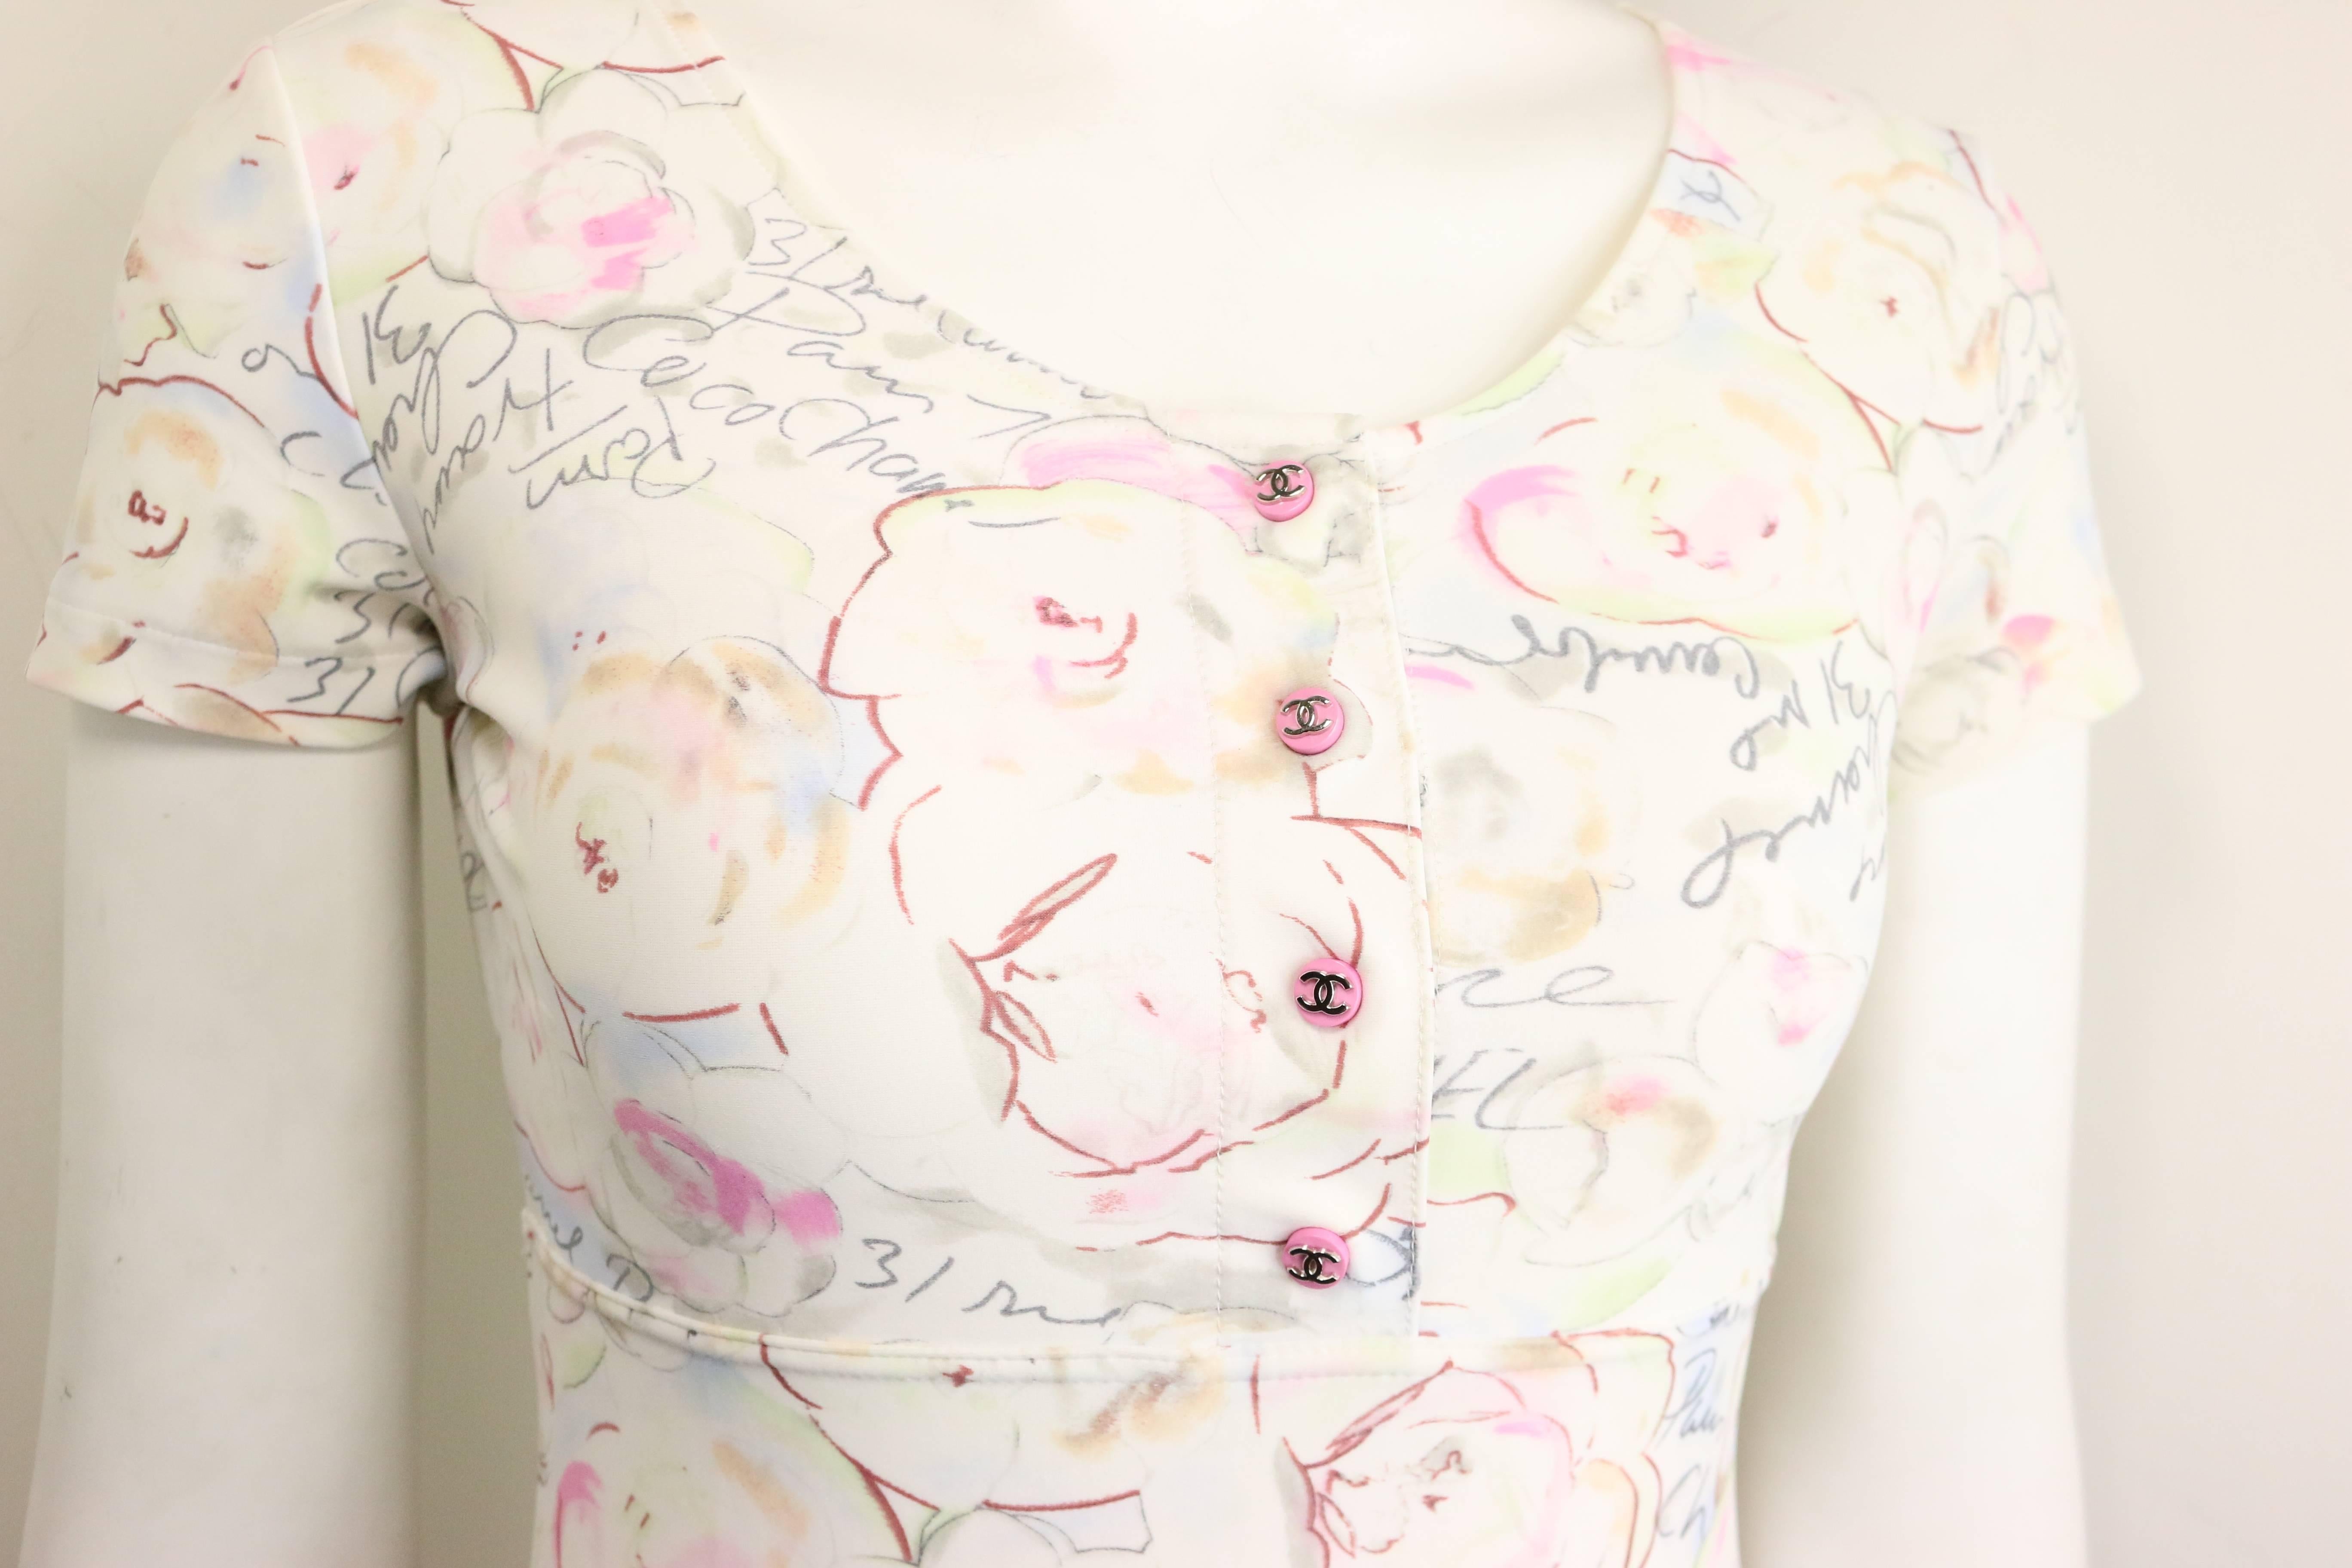 - Vintage Chanel white lycra floral and Coco Chanel print short sleeves dress from 1995 cruise collection. The whole dress have wordings like Paris, France, Coco Chanel written all over! 

- Featuring four pink silver 